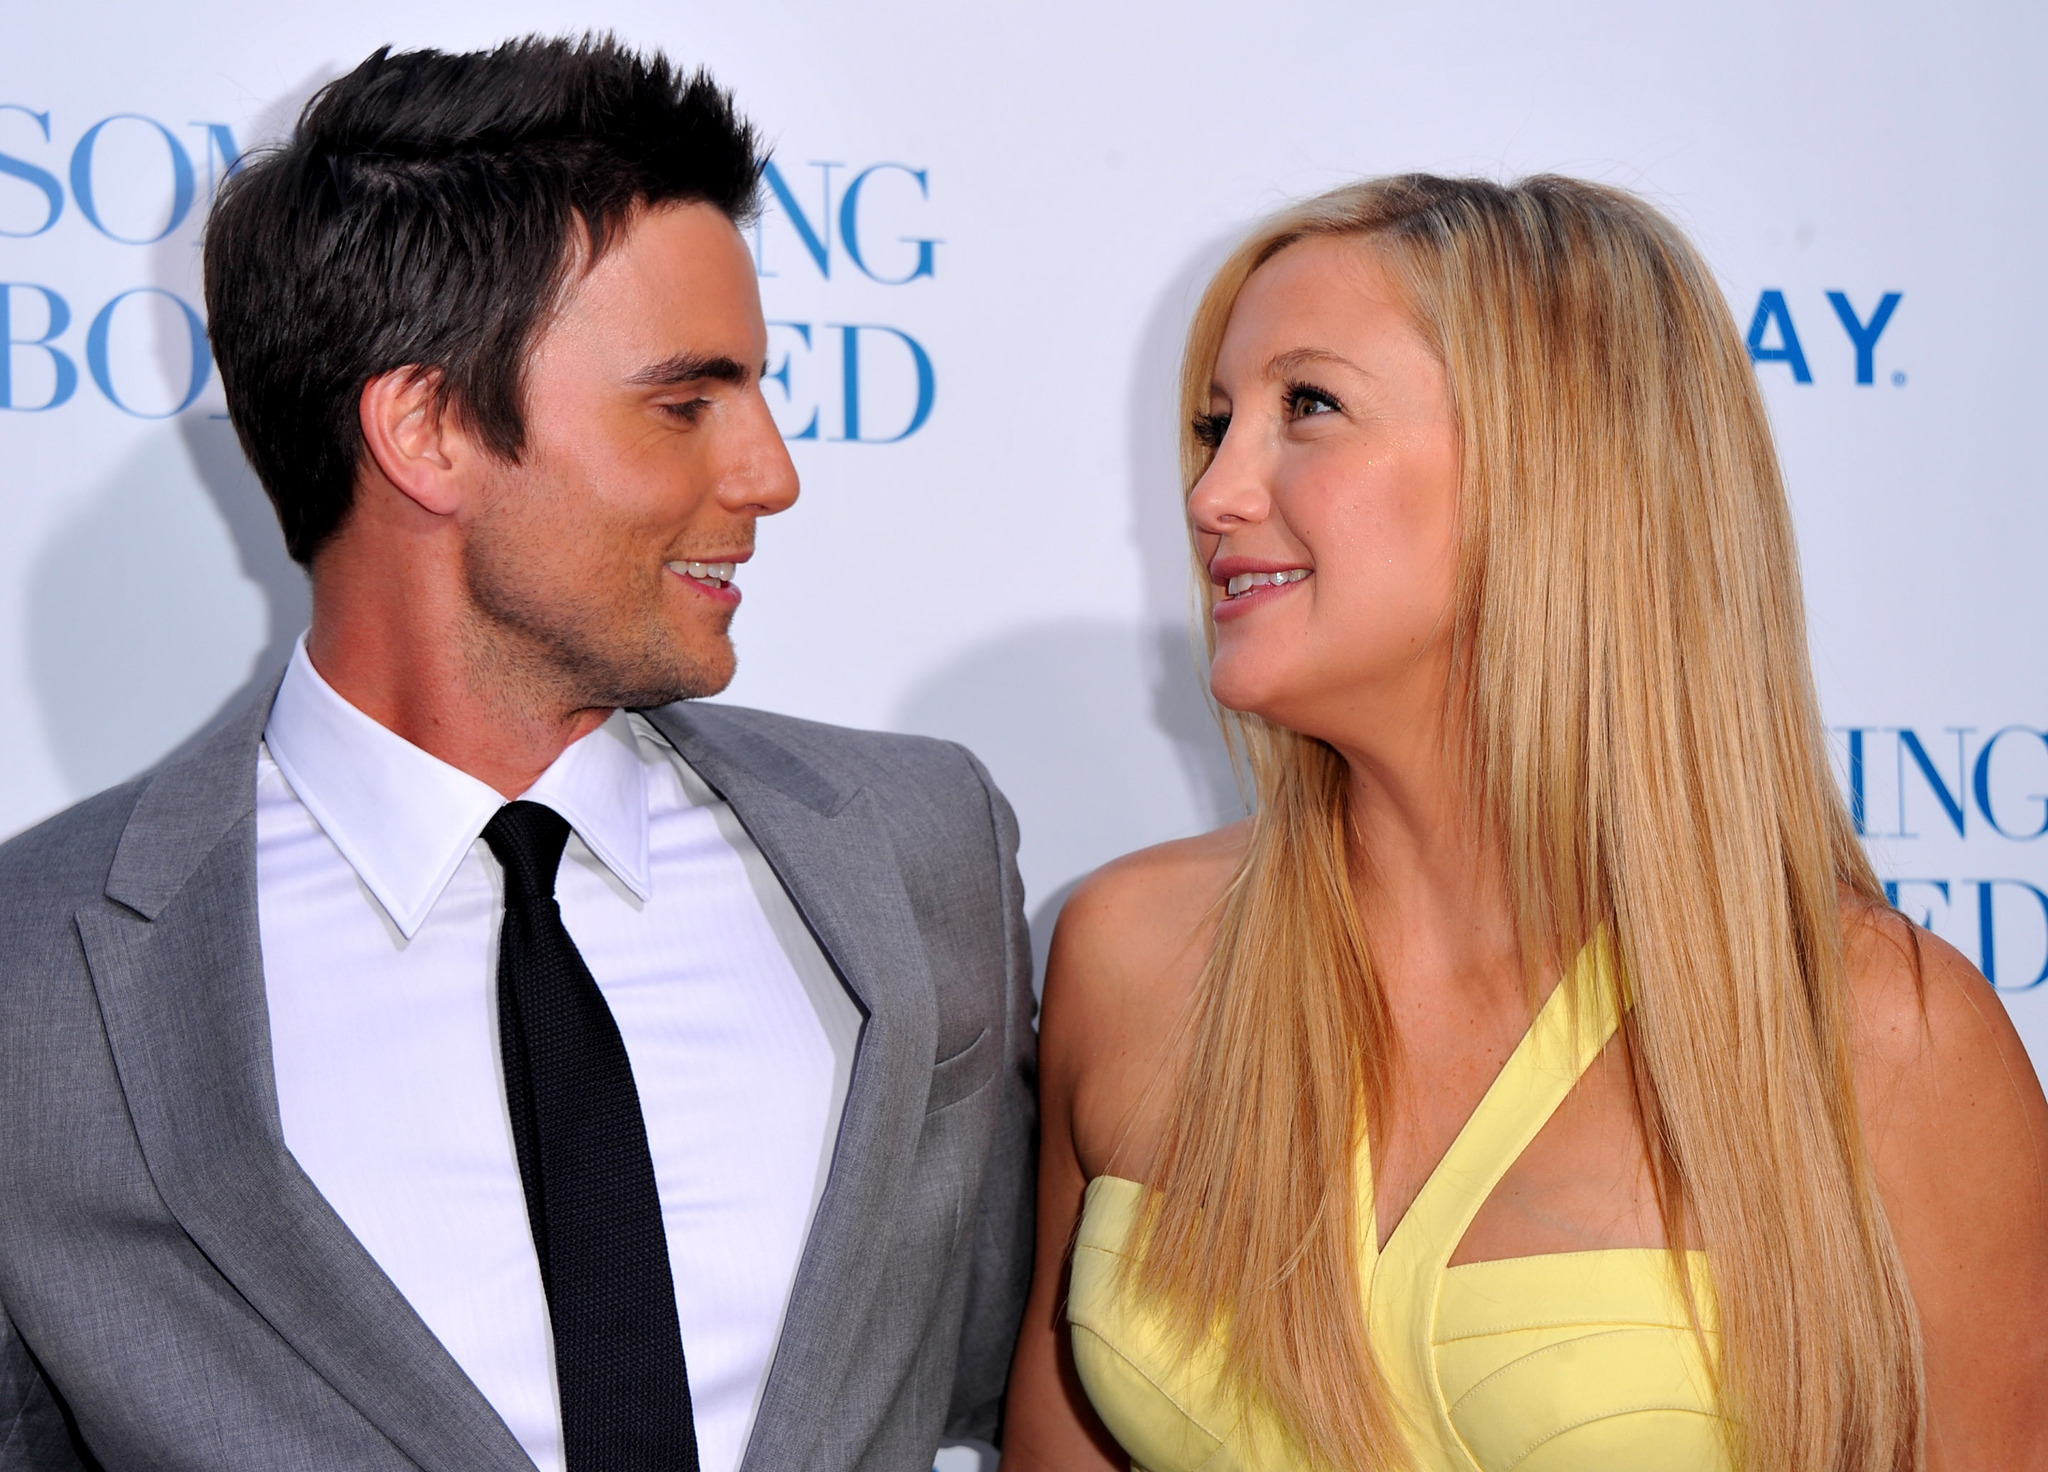 Kate Hudson and Colin Egglesfield